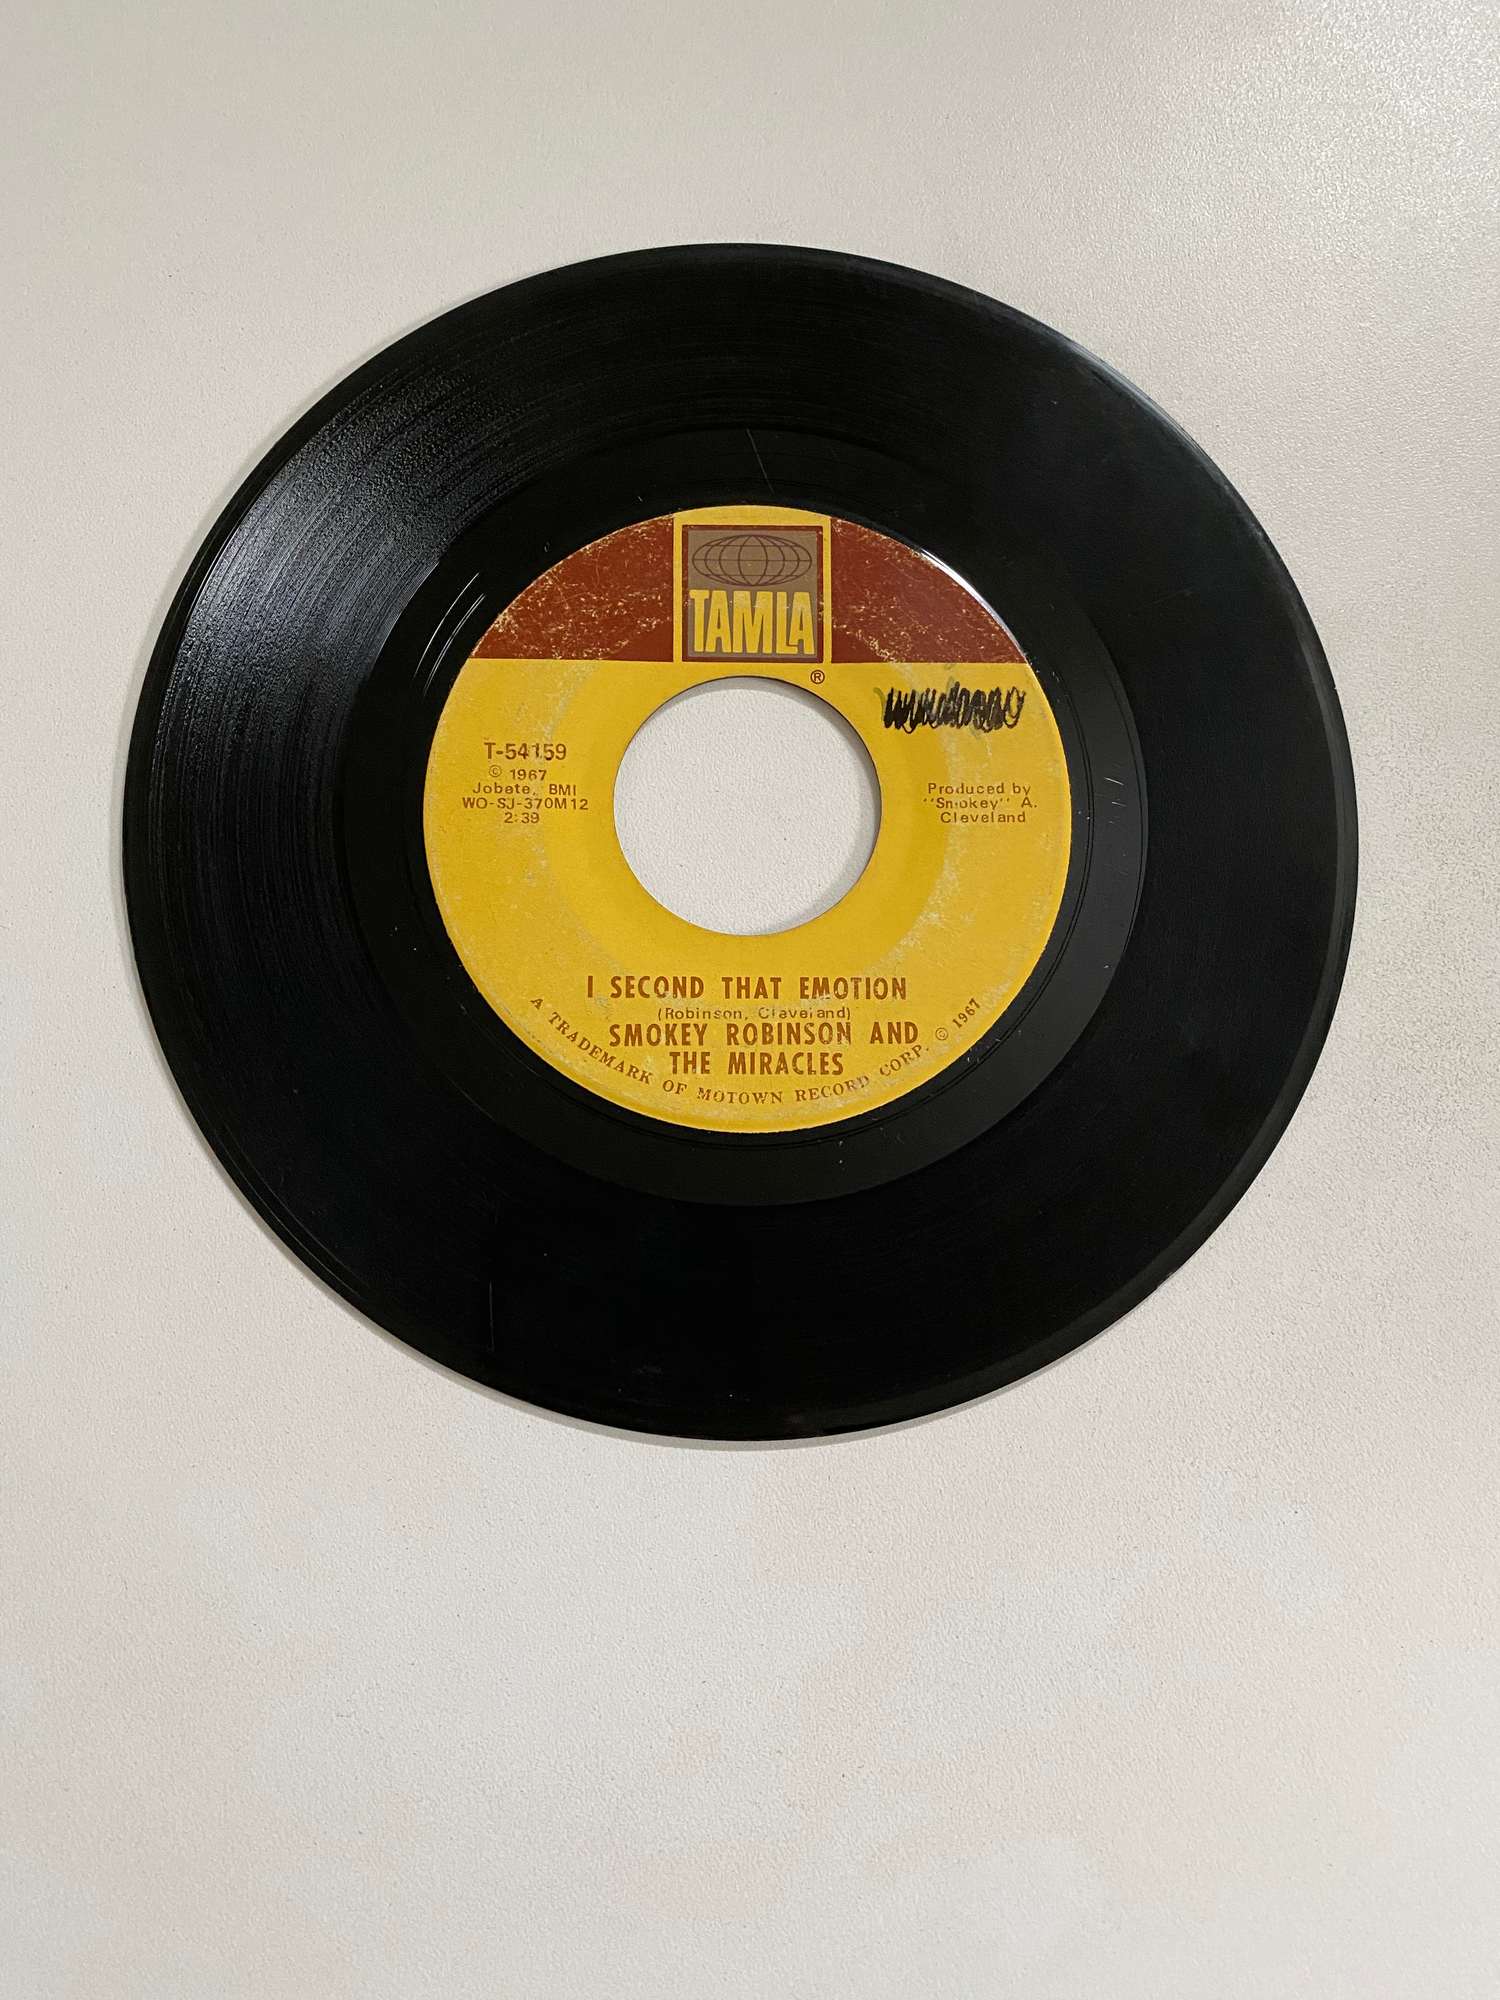 Smokey Robinson and The Miracles - I Second That Emotion | 45 The Vintedge Co.